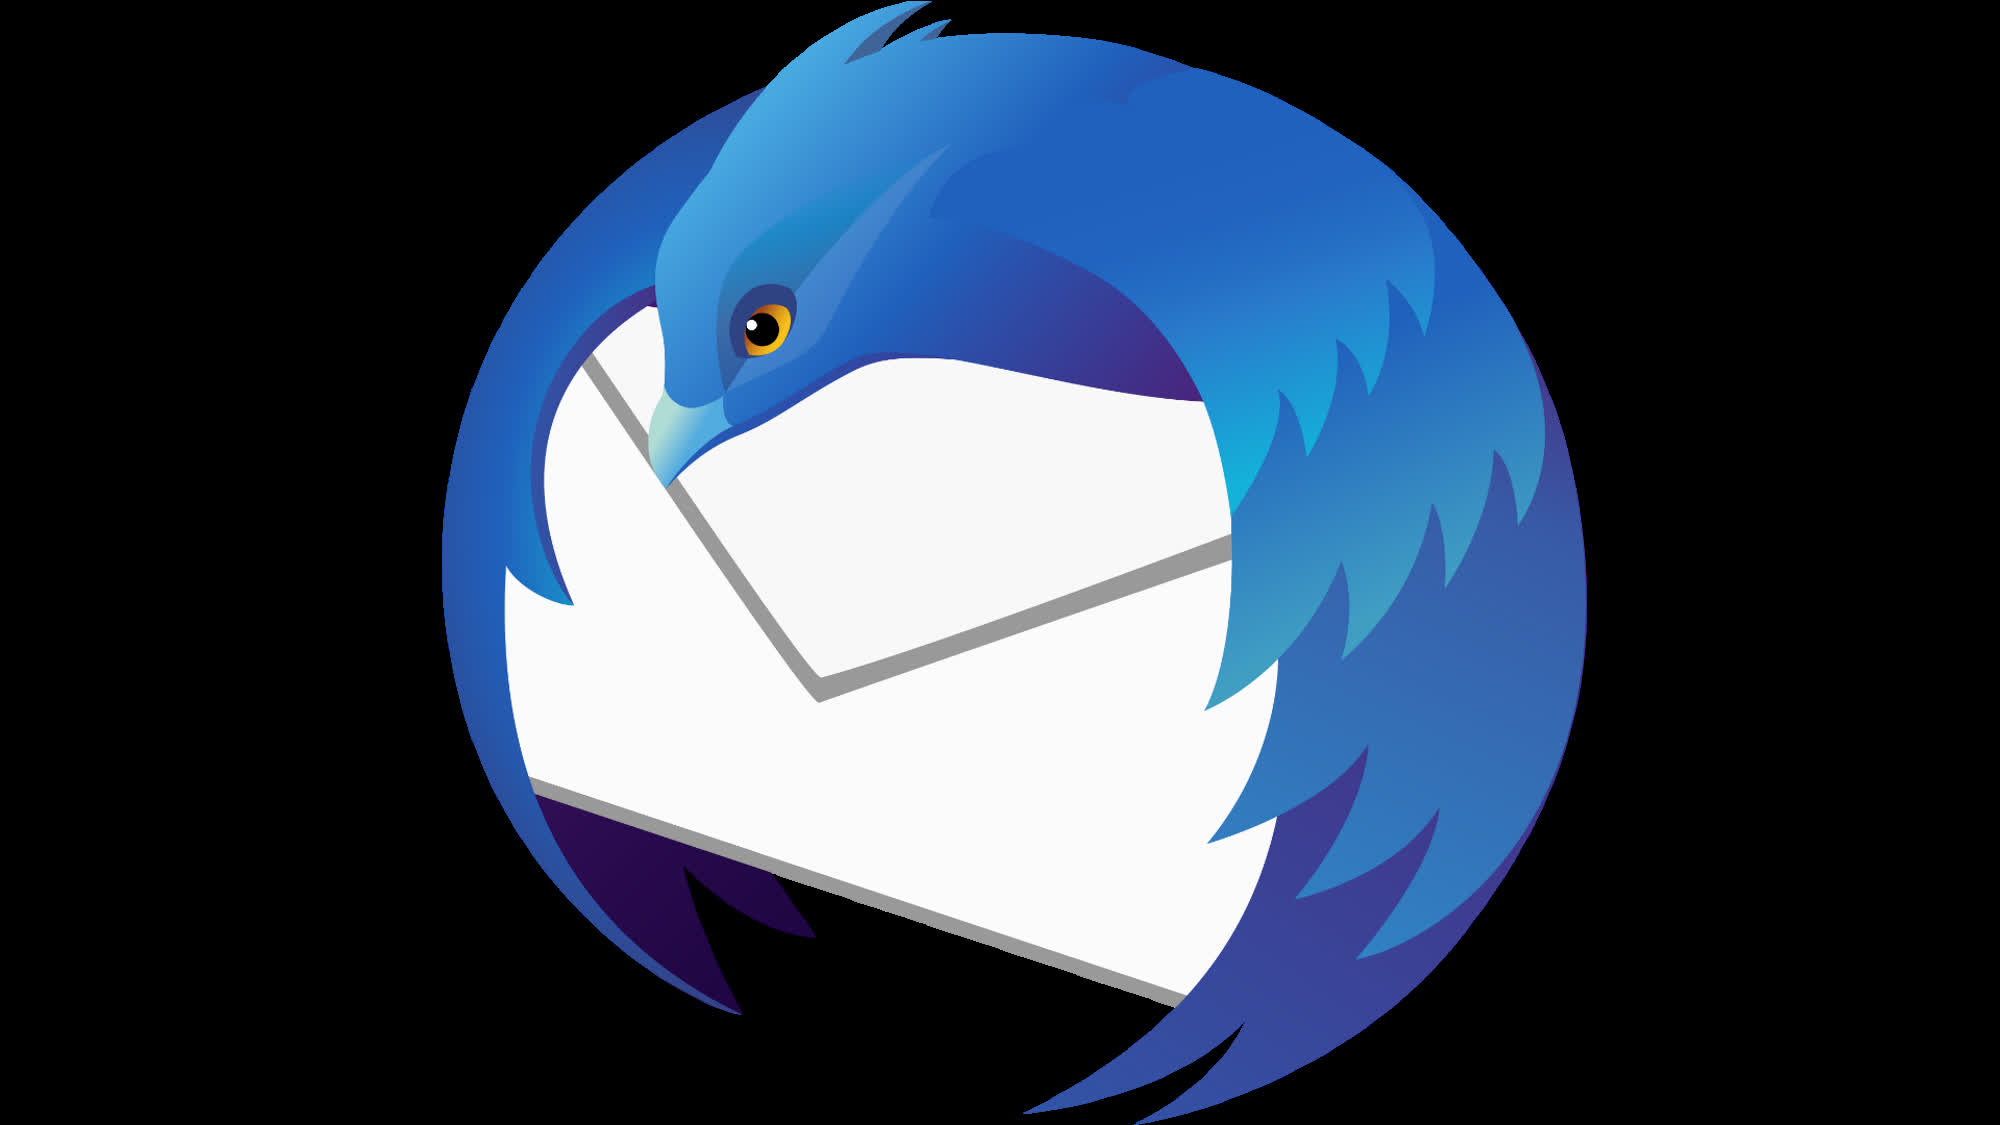 Mozilla is working to add paid services to Thunderbird